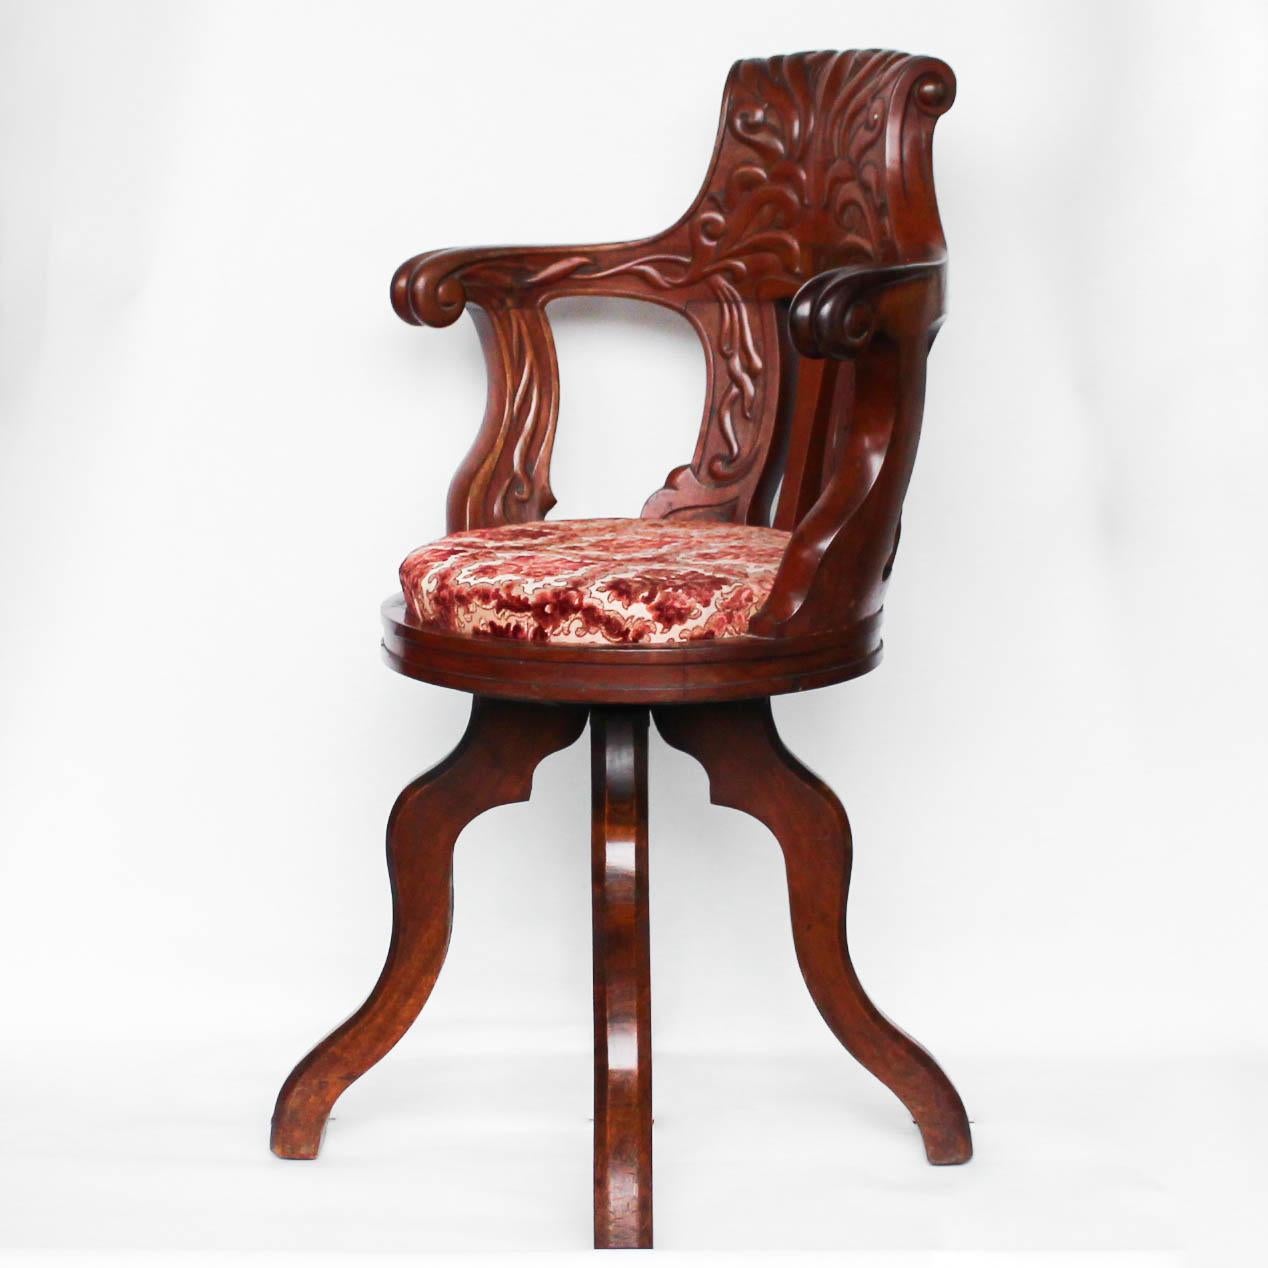 A solid, carved, walnut saloon chair from HMHS Britannic, sister ship to the Titanic.


   